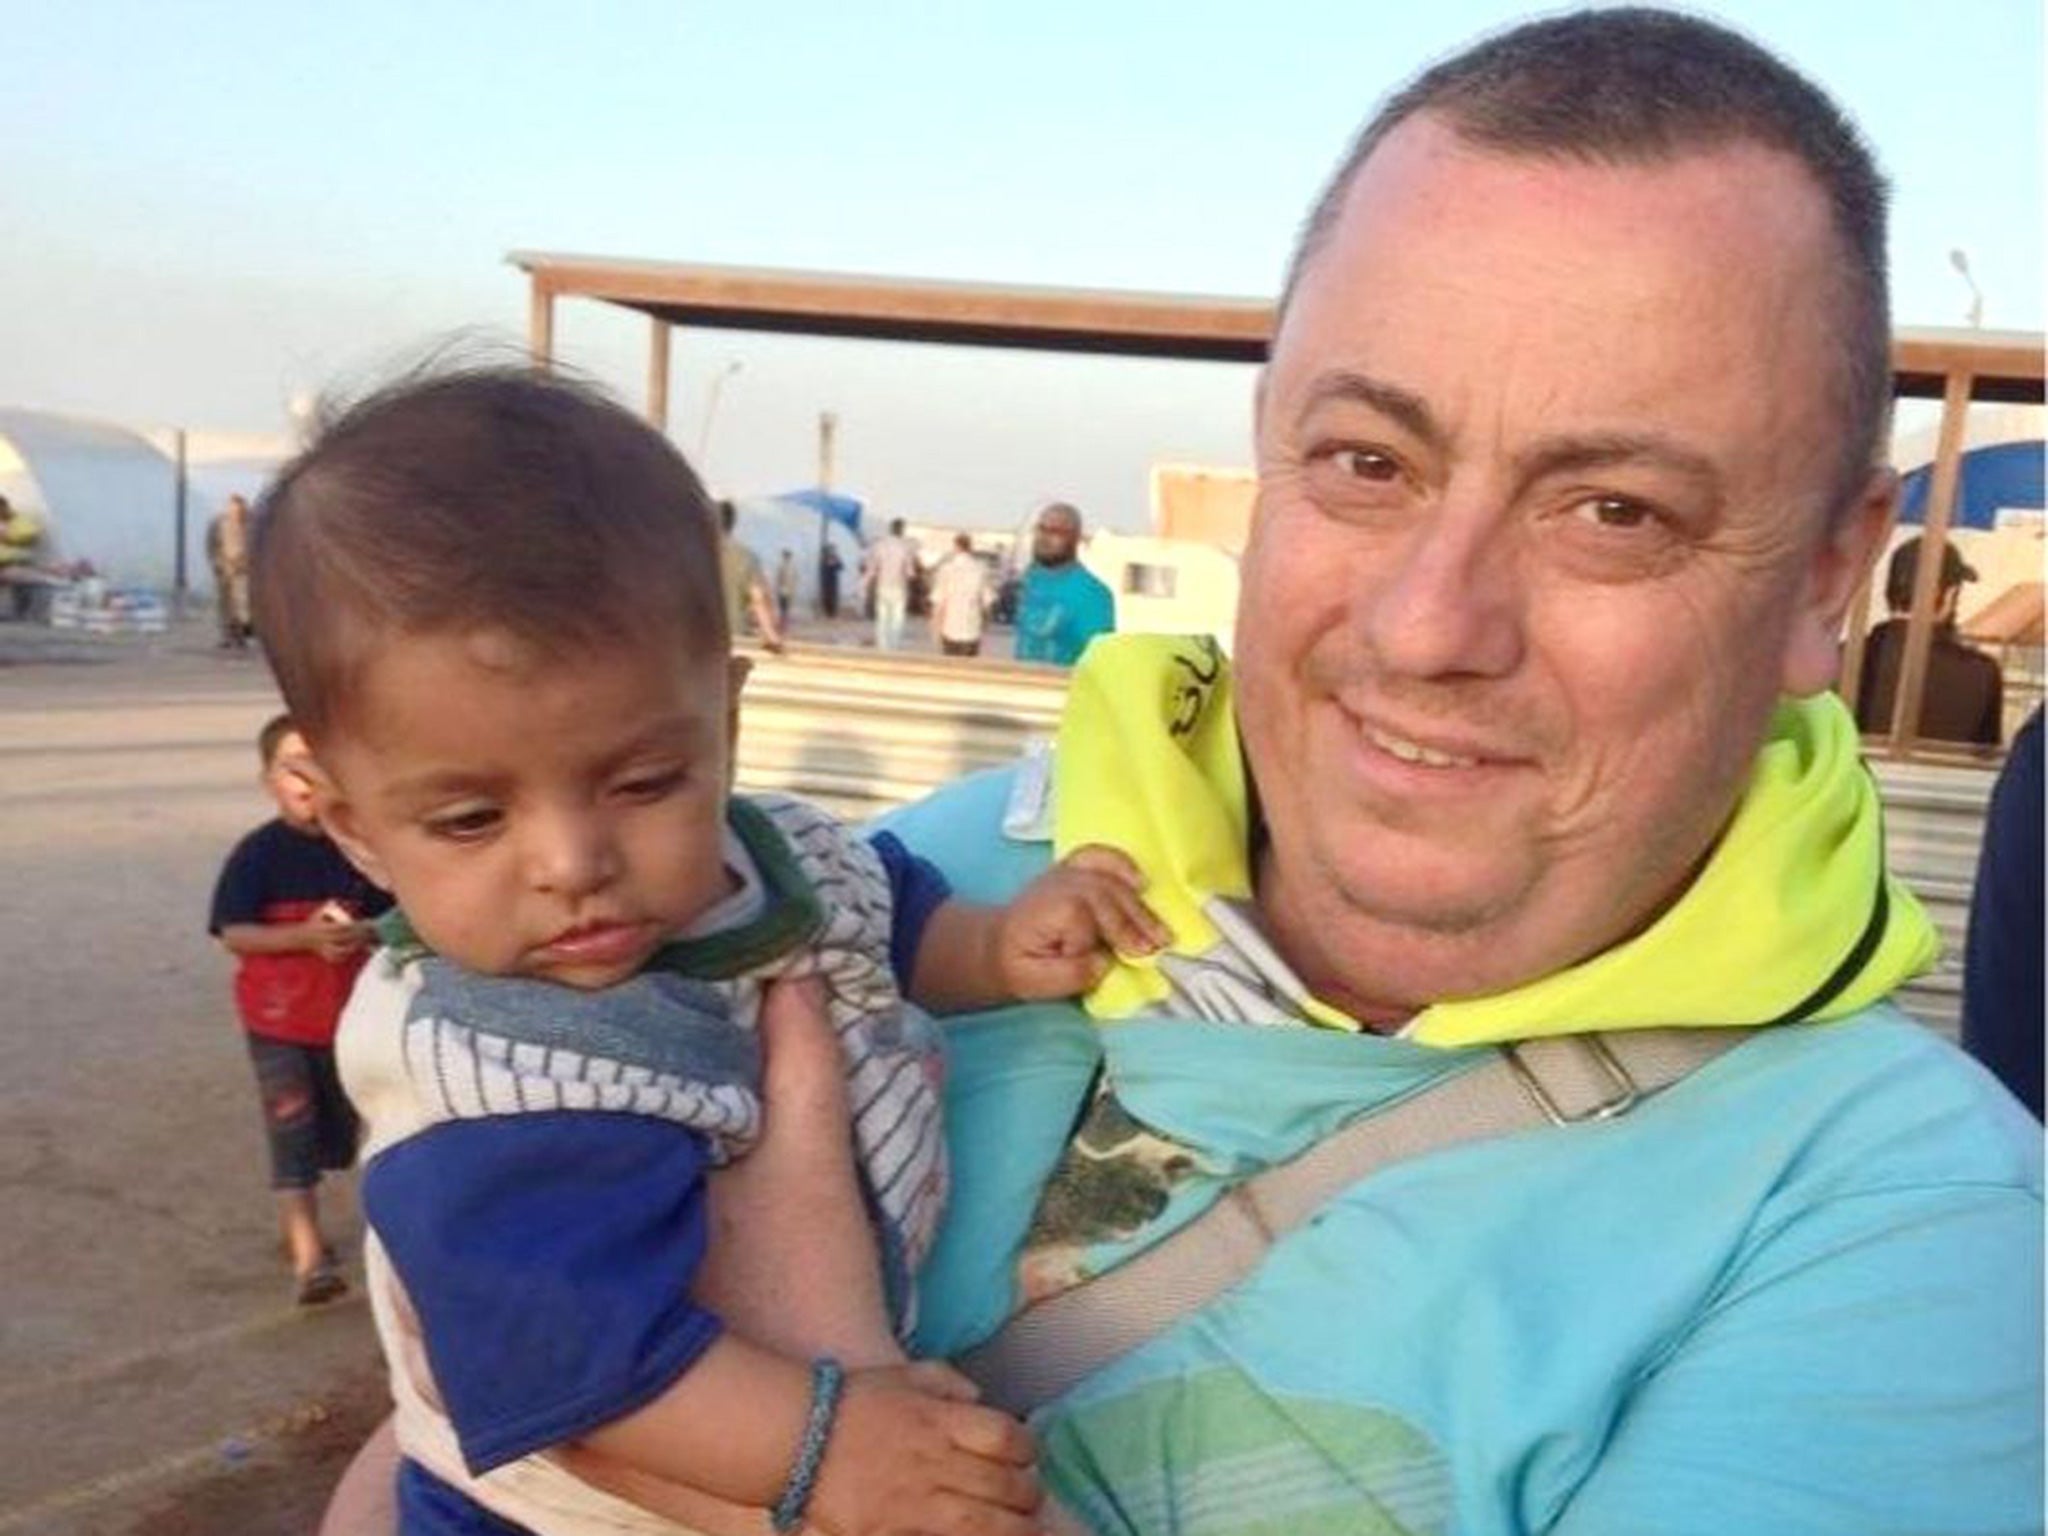 Alan Henning was decapitated by Mohammed Emwazi after being seized in Syria